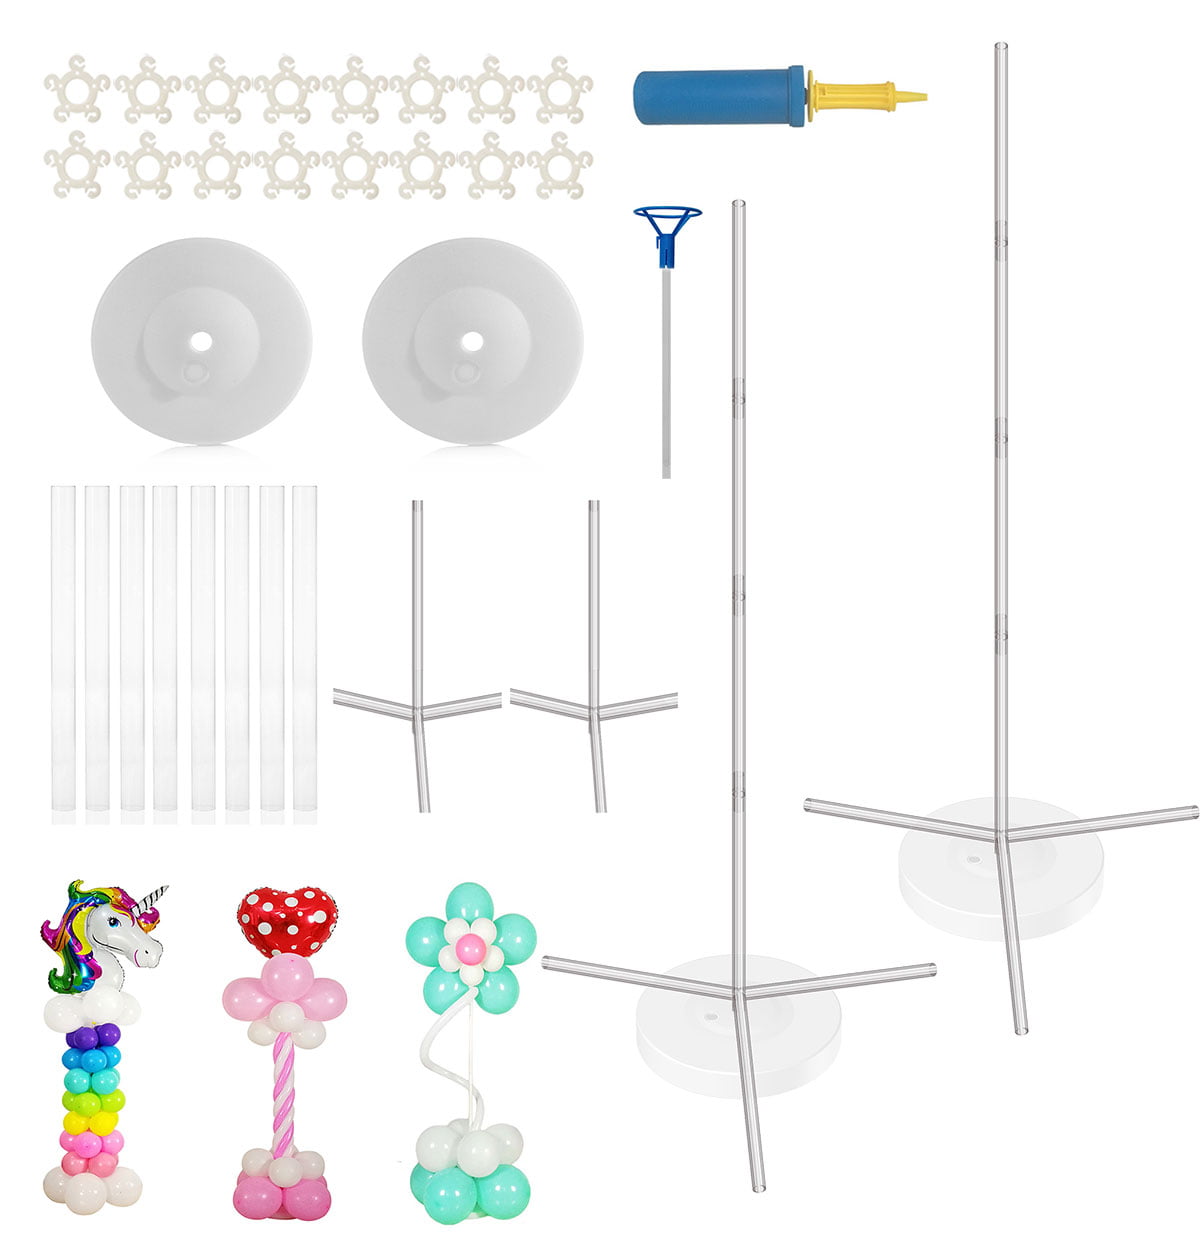 Balloon Column Stand Set For Birhday Party Decoration With 20pc Balloon Buckles 